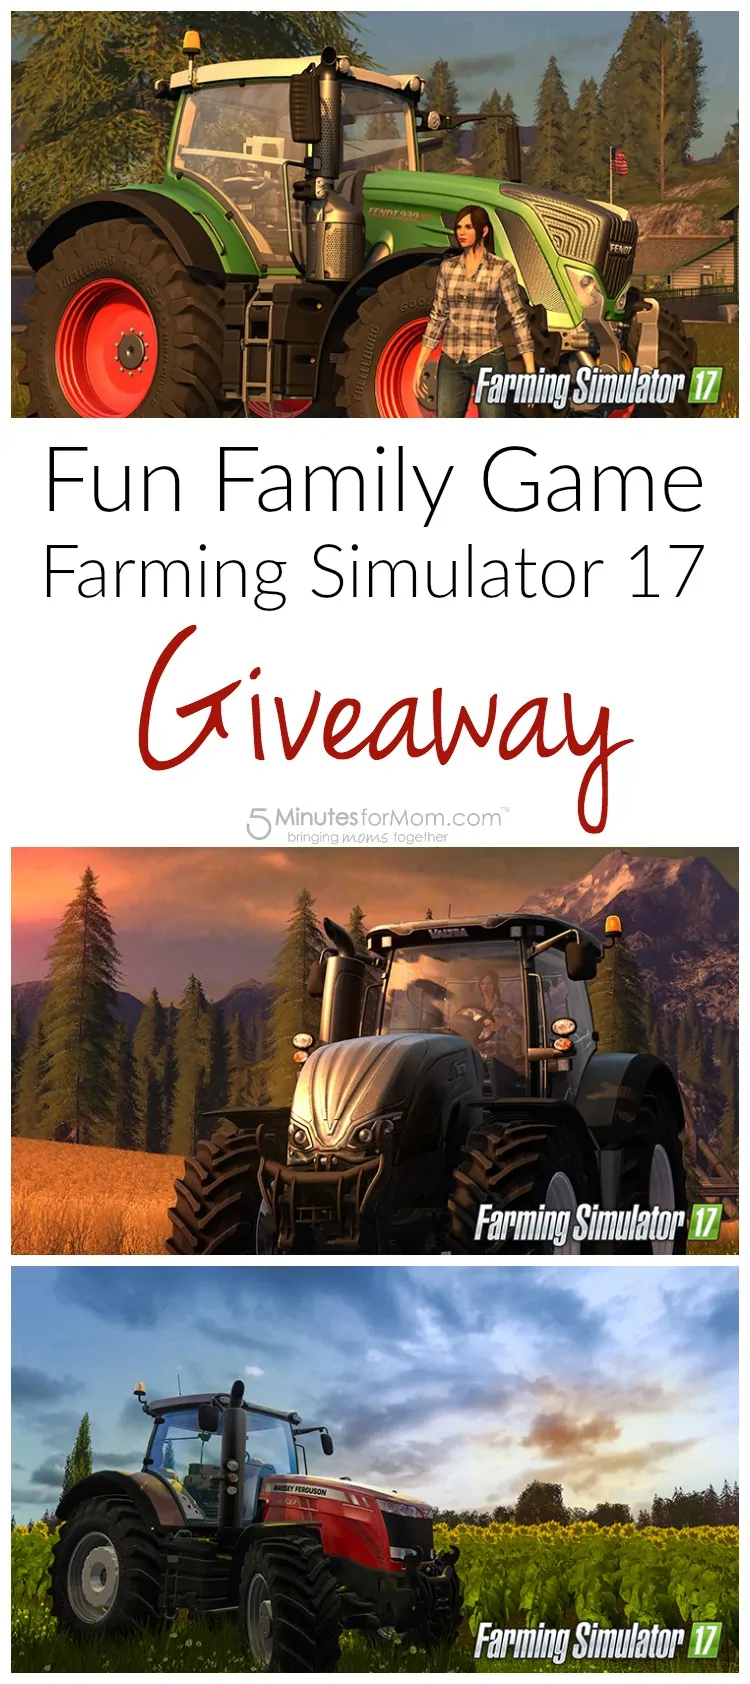 Fun gift idea - Farming Simulator 17 - Play it together as a family - Giveaway